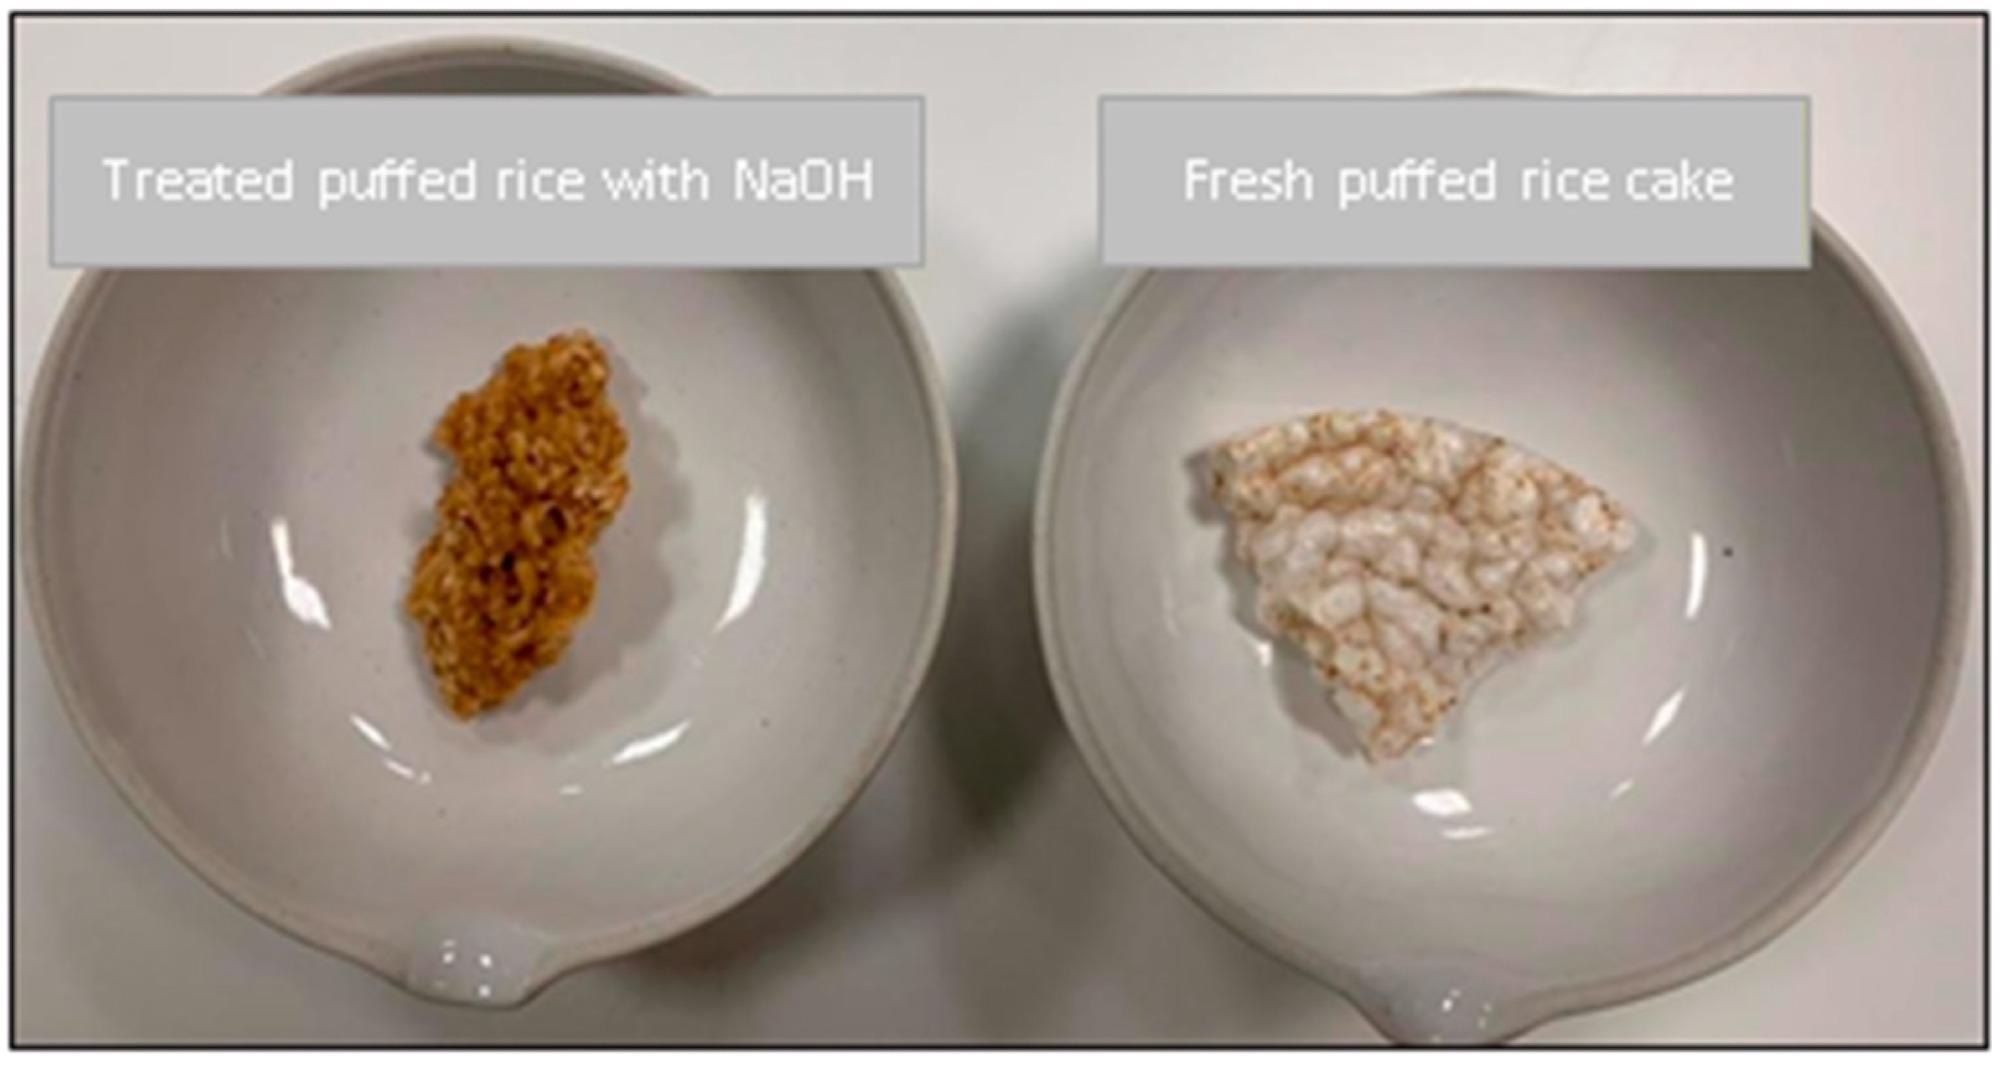 Fresh puffed rice sample and sample treated with sodium hydroxide.